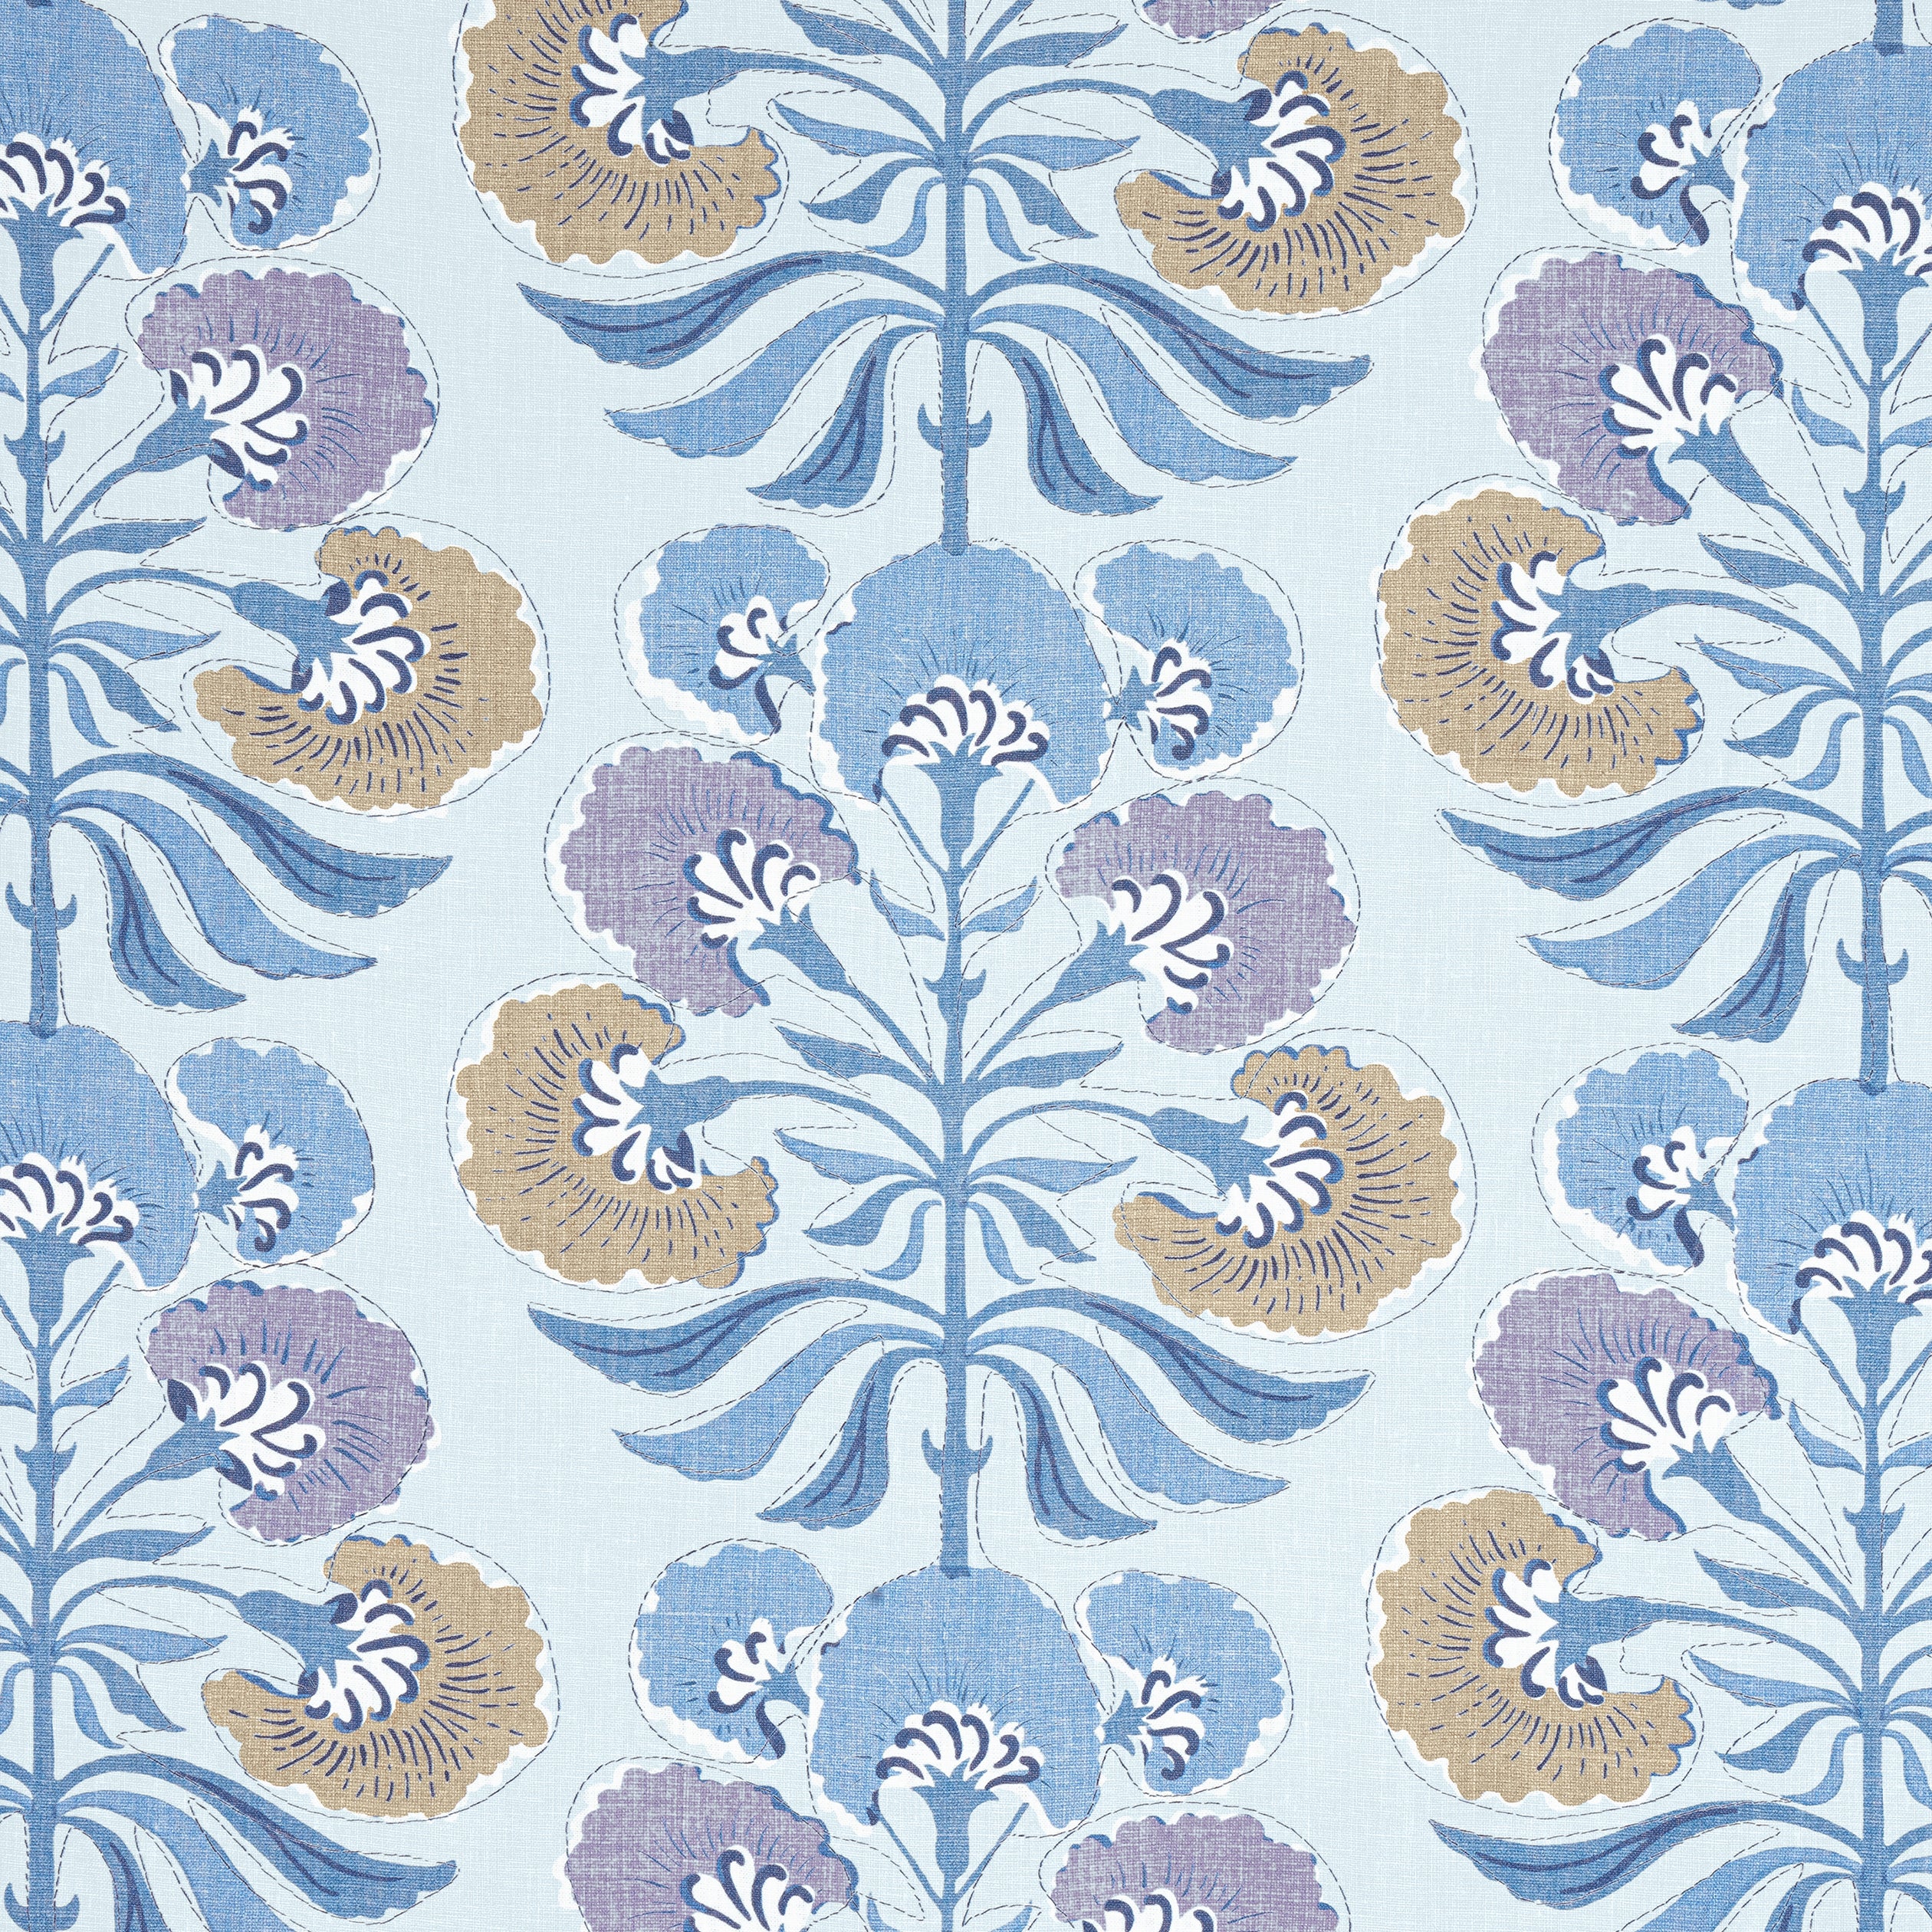 Tybee Tree fabric in lavender and blue color - pattern number F916216 - by Thibaut in the Kismet collection